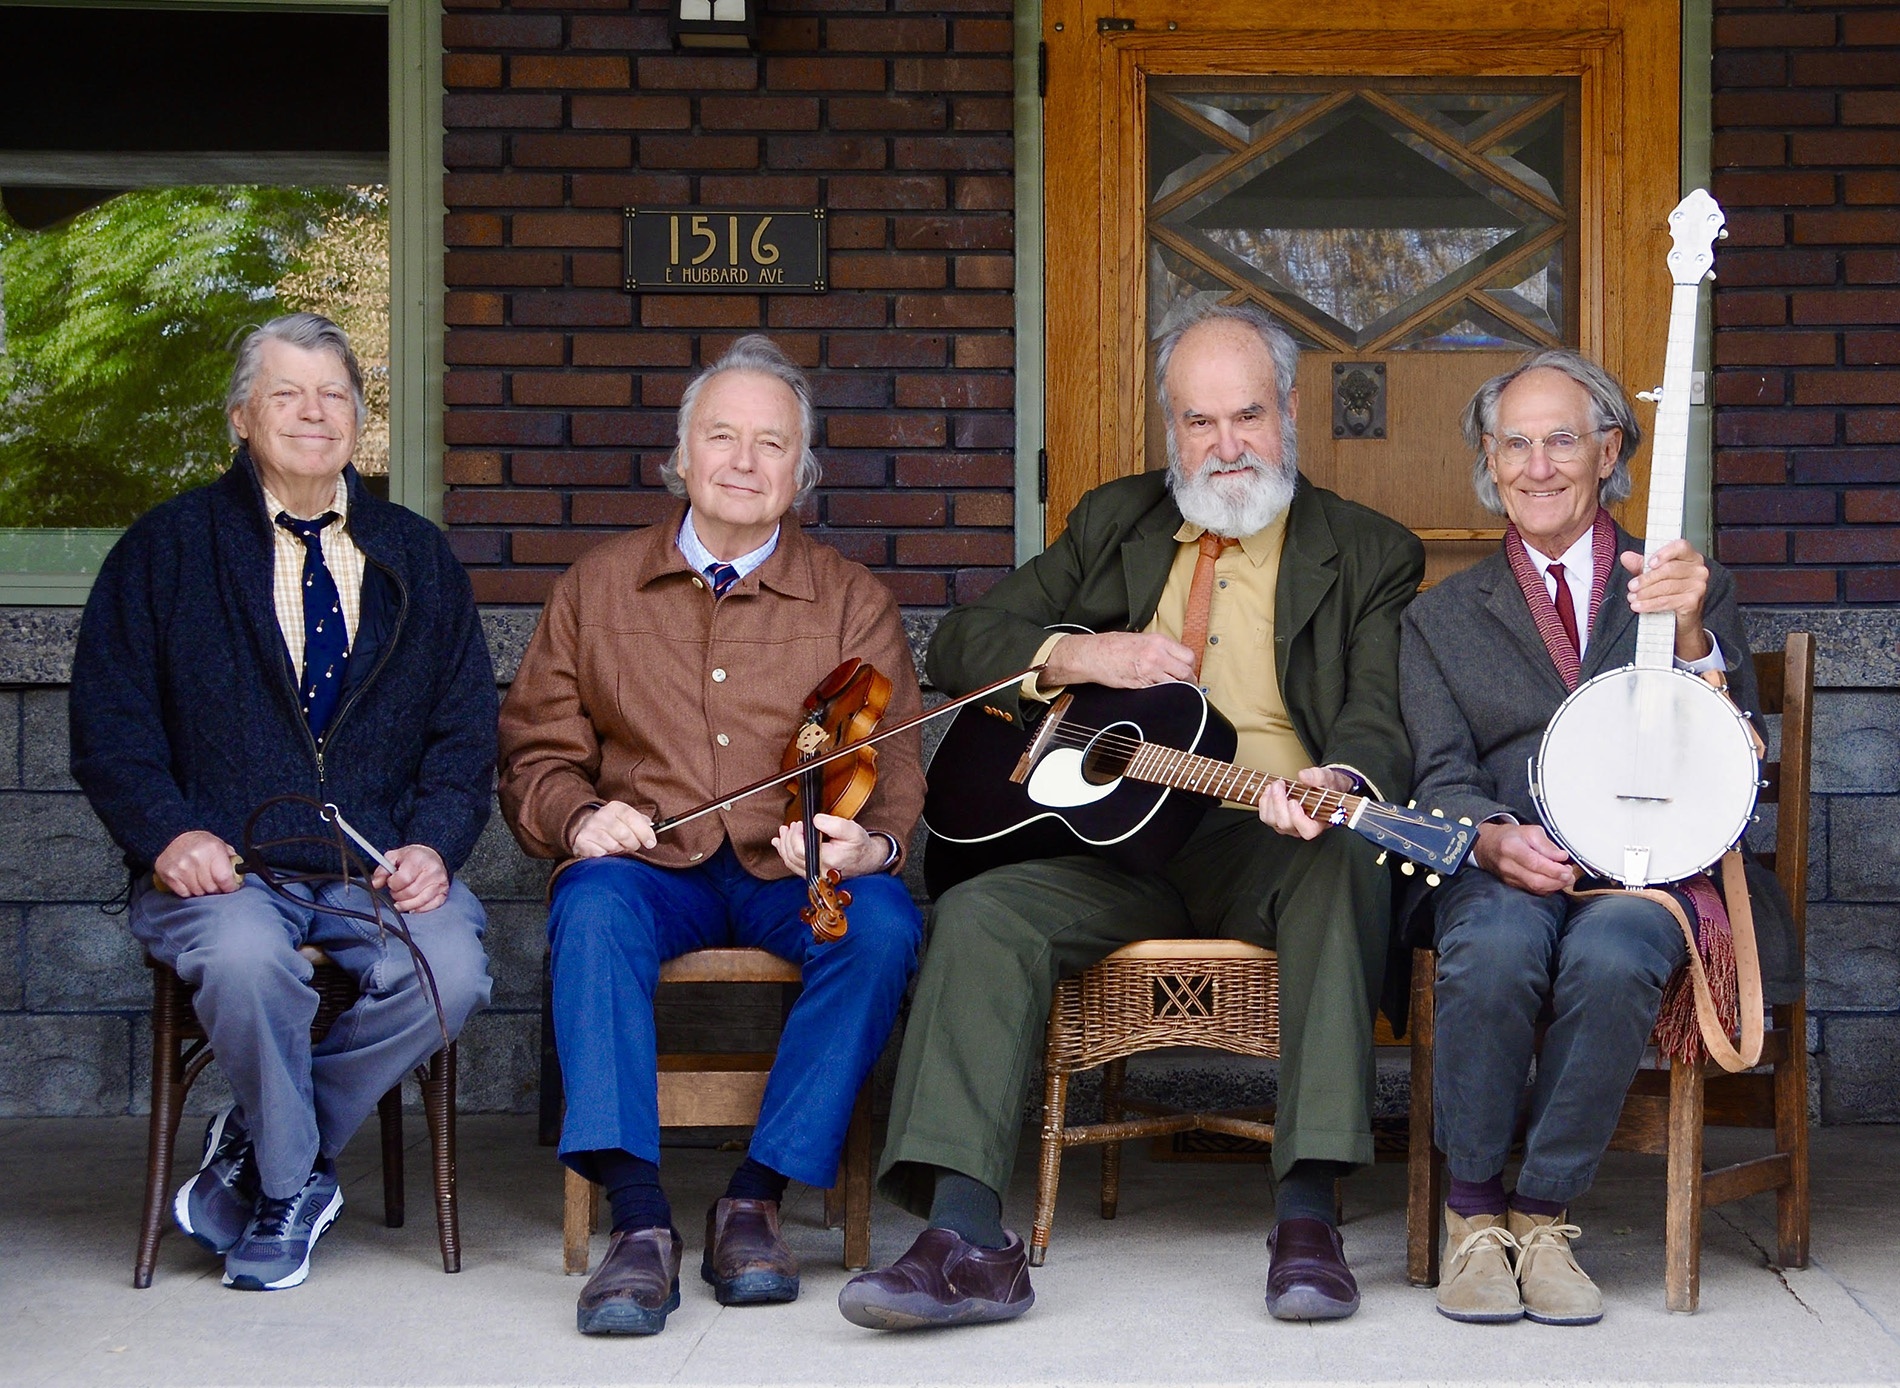 Image of the "Rhode Island Mudflaps" bandmates on a porch with instruments